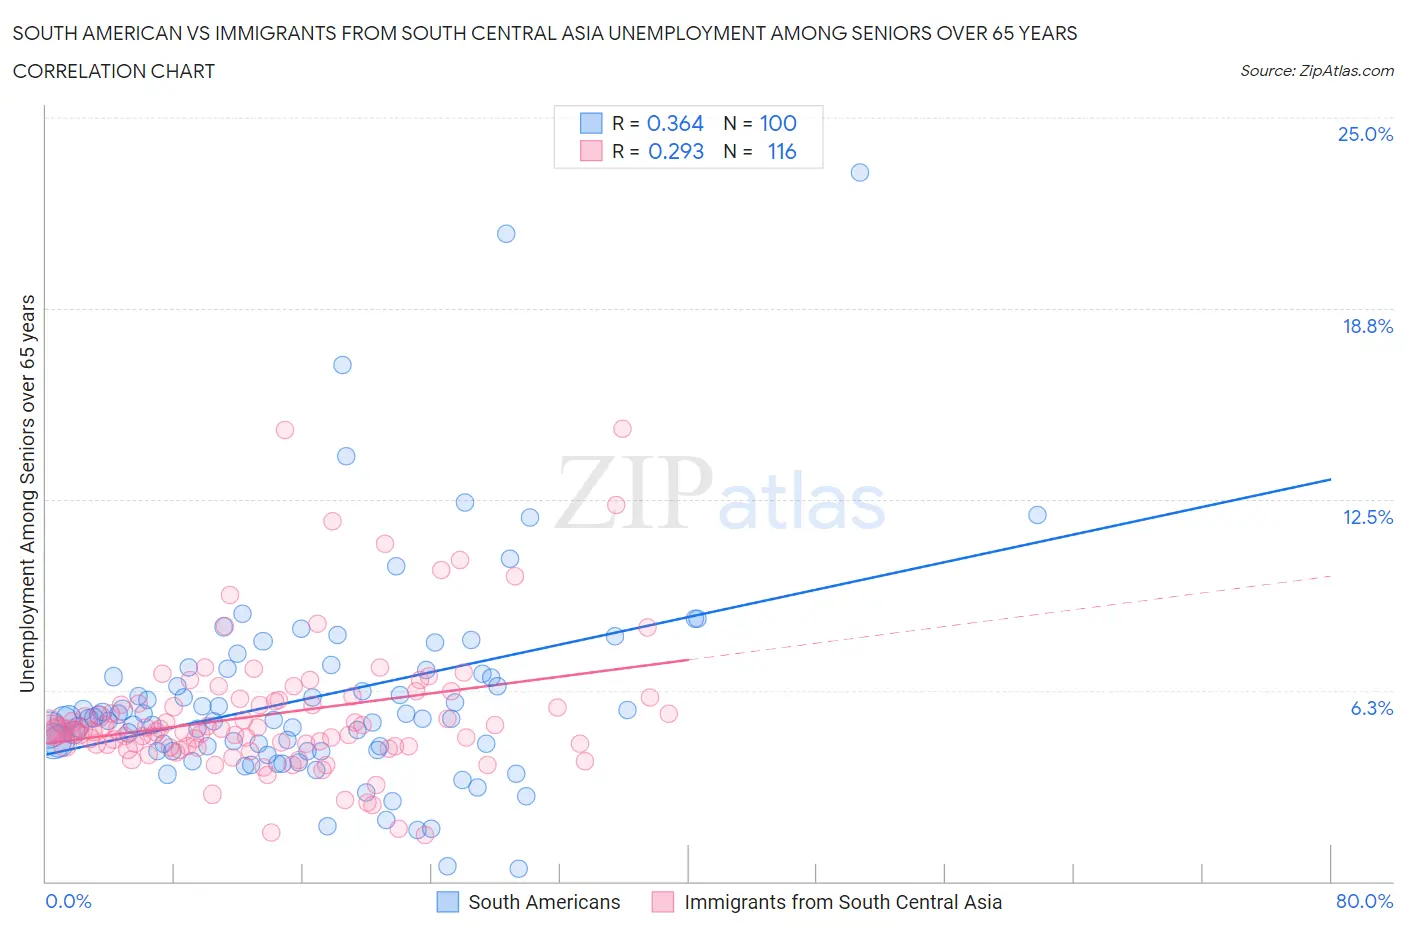 South American vs Immigrants from South Central Asia Unemployment Among Seniors over 65 years